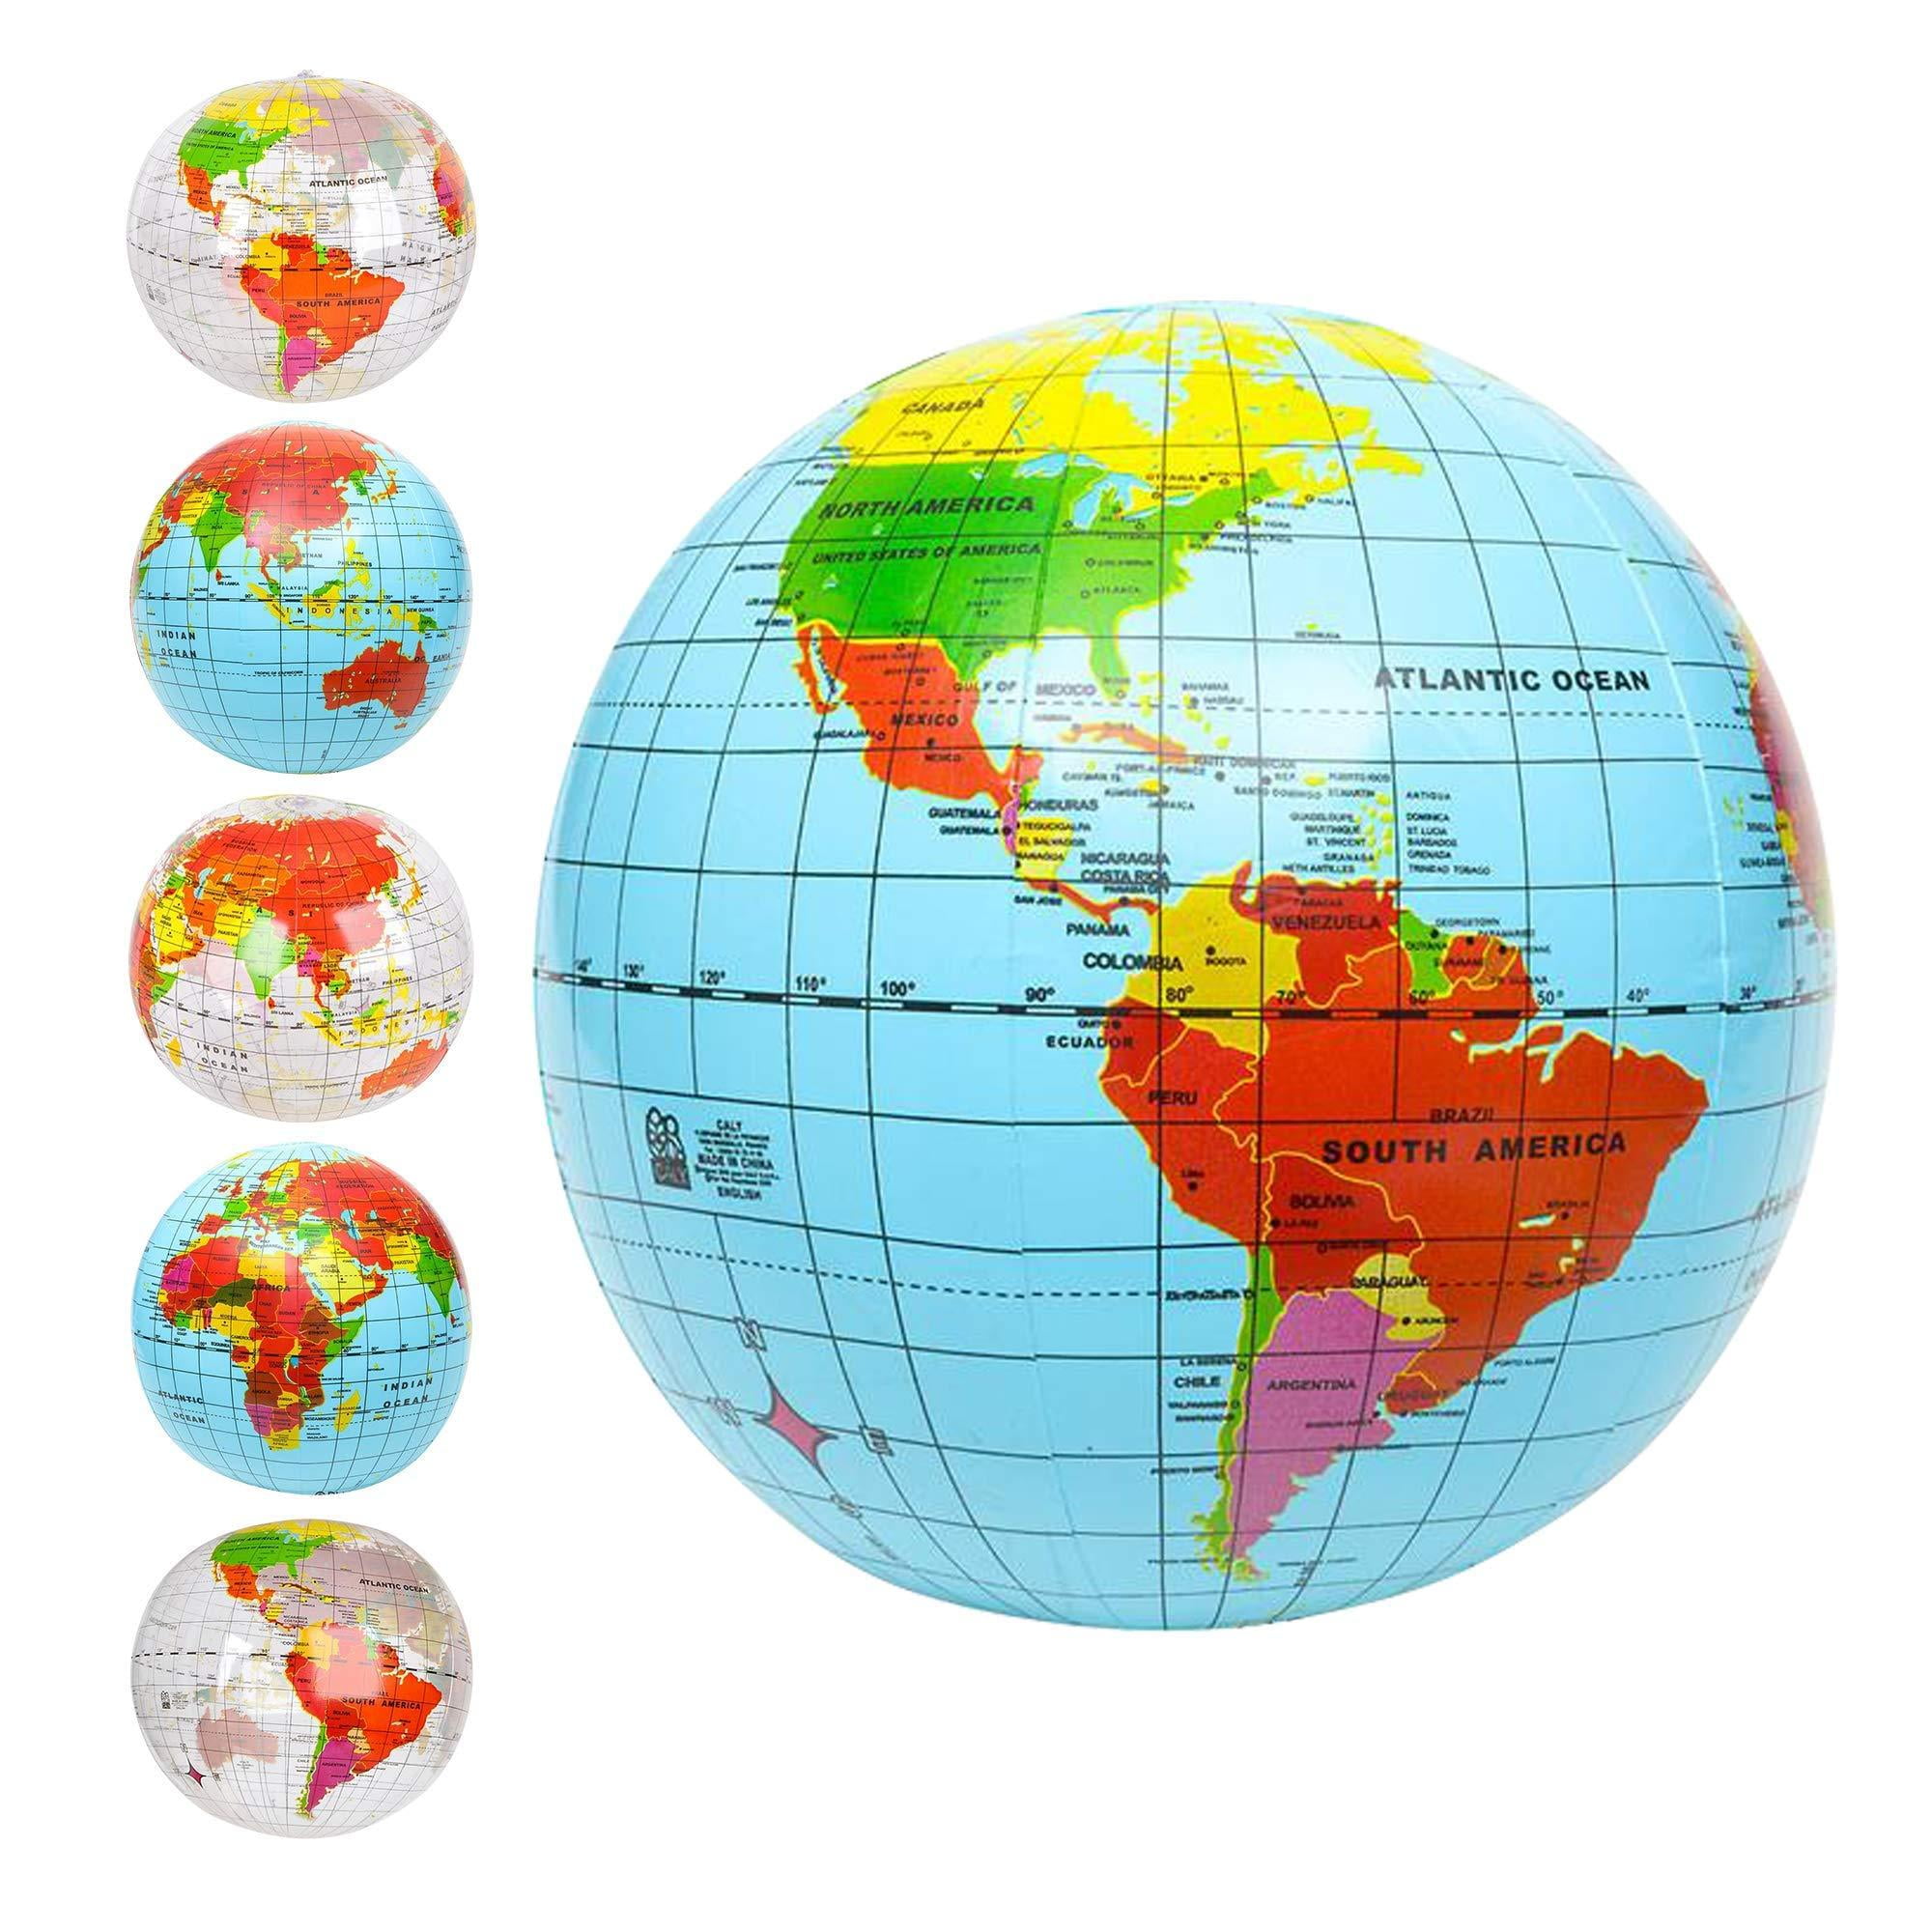 by ArtCreativity Print Blue and Clear Set of 6 Inflatable World Globe Ball Set Colorful Earth Map 12-16 Inflattable Beachball for Pool Summer Fun Toys for Kids Learning & More 